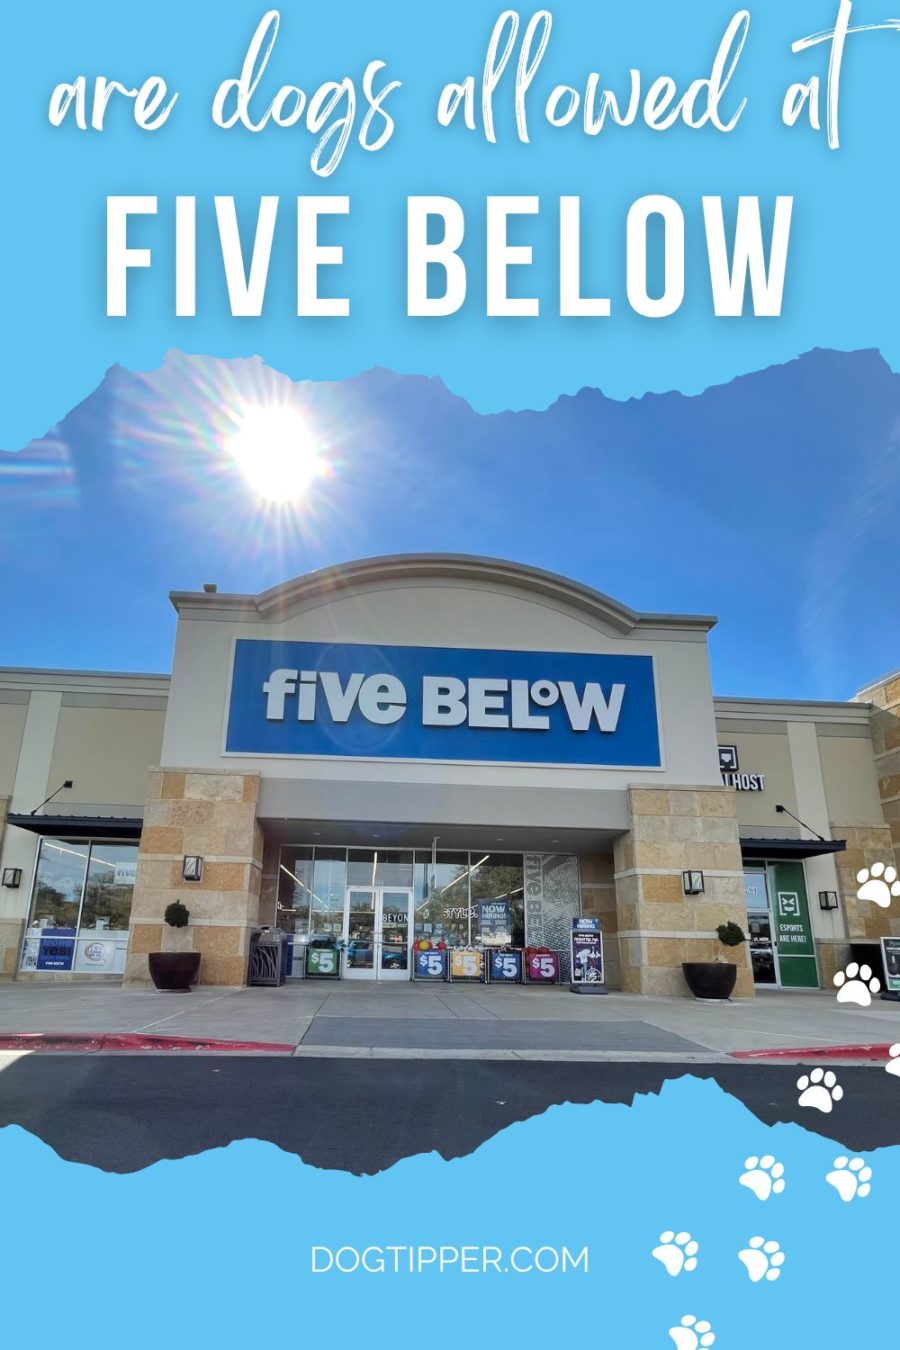 Are Dogs Allowed in Five Below?